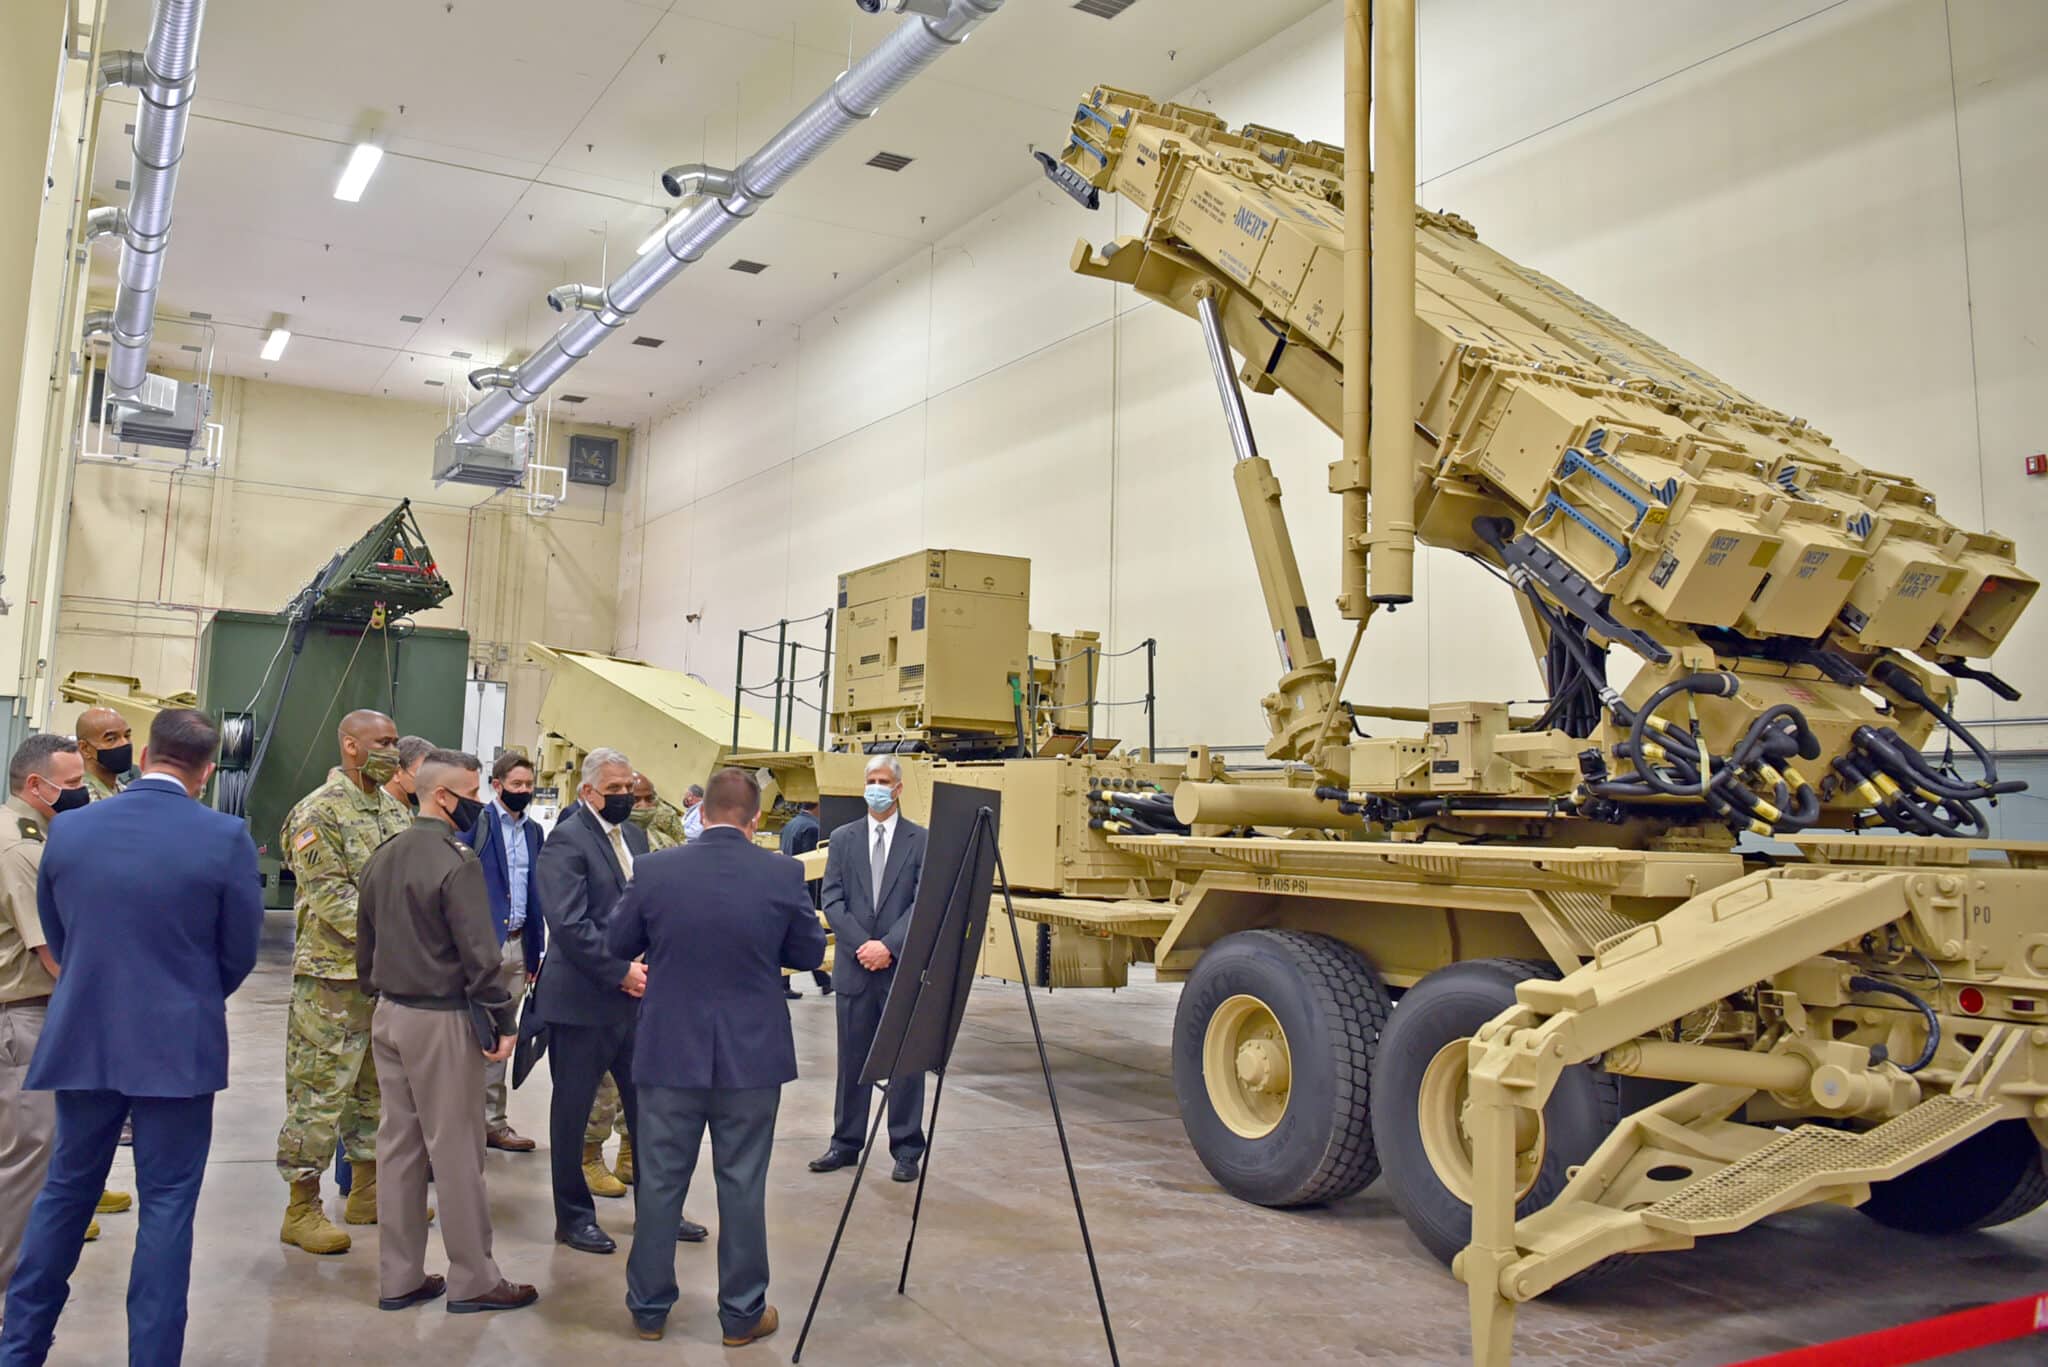 US Army Undersecretary and staff looking at a brown missile battery ina closed space